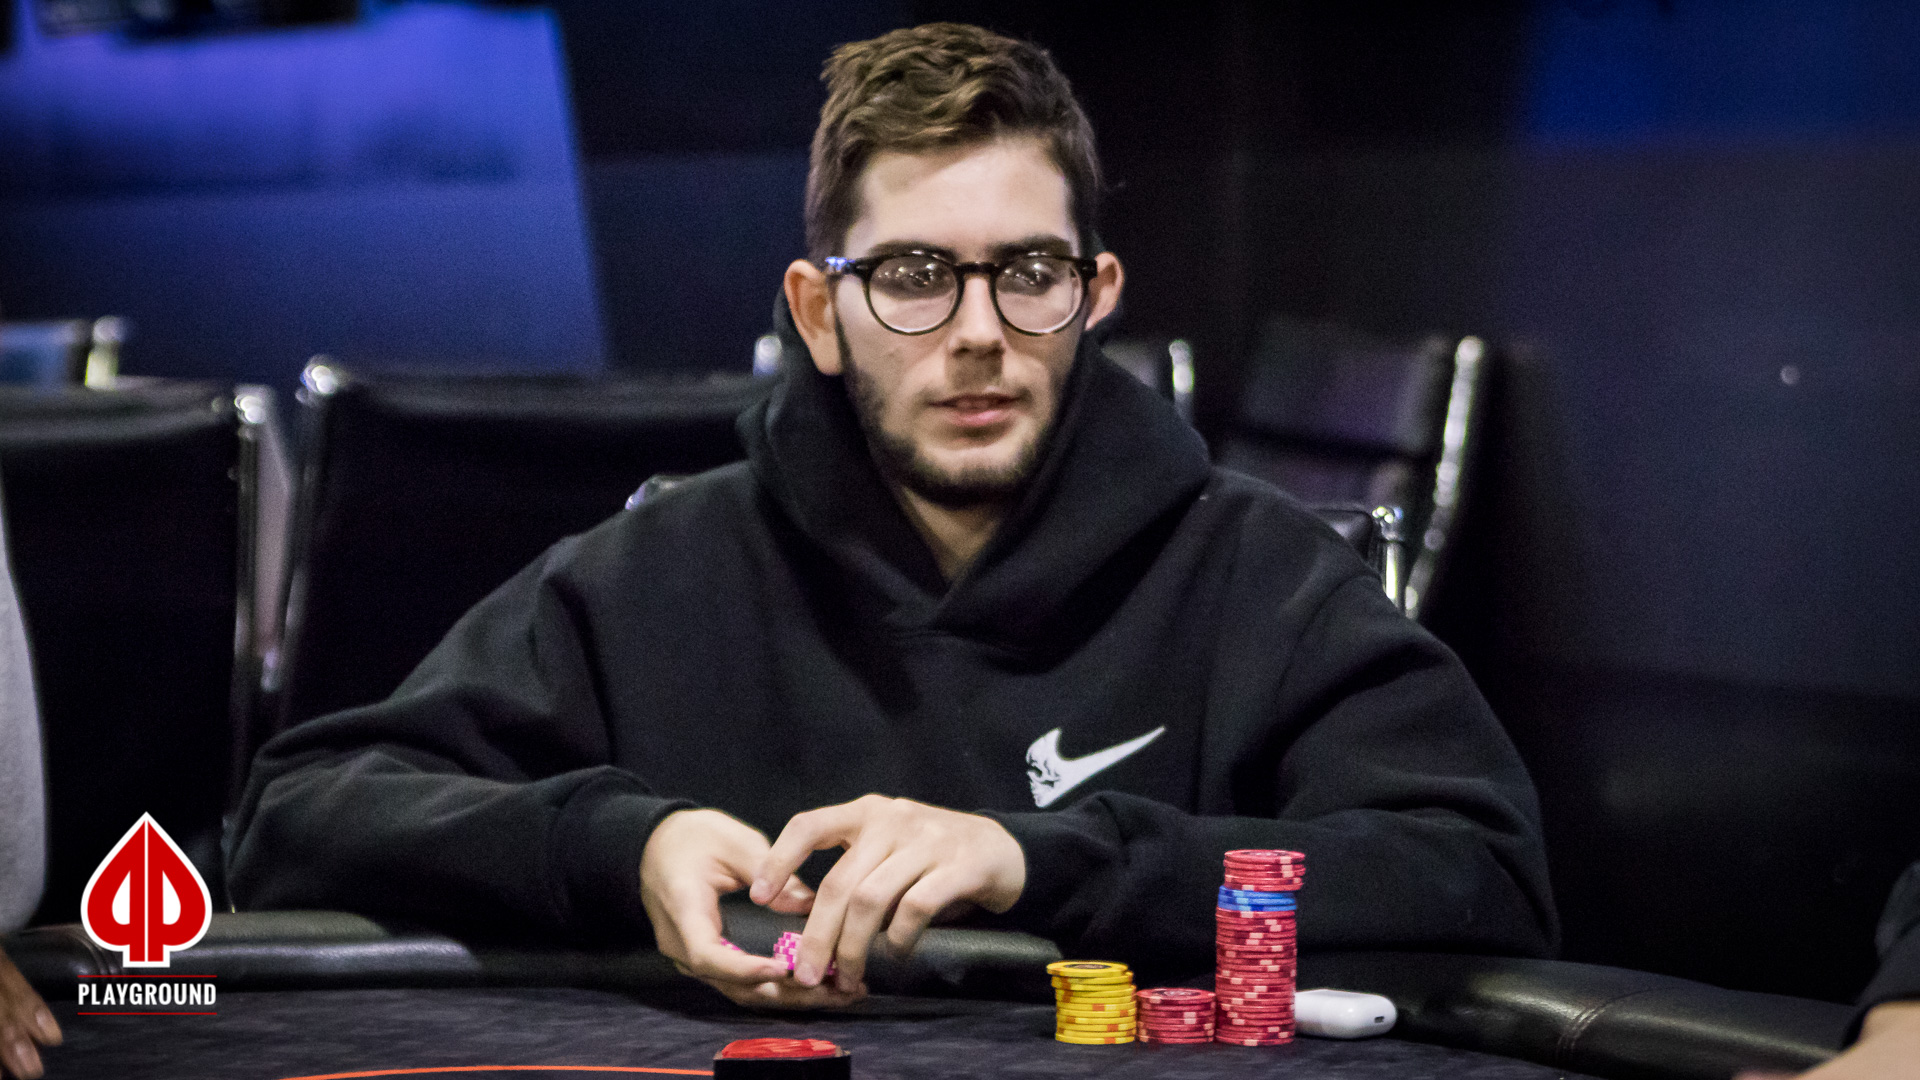 Soussan is out – 3 players left